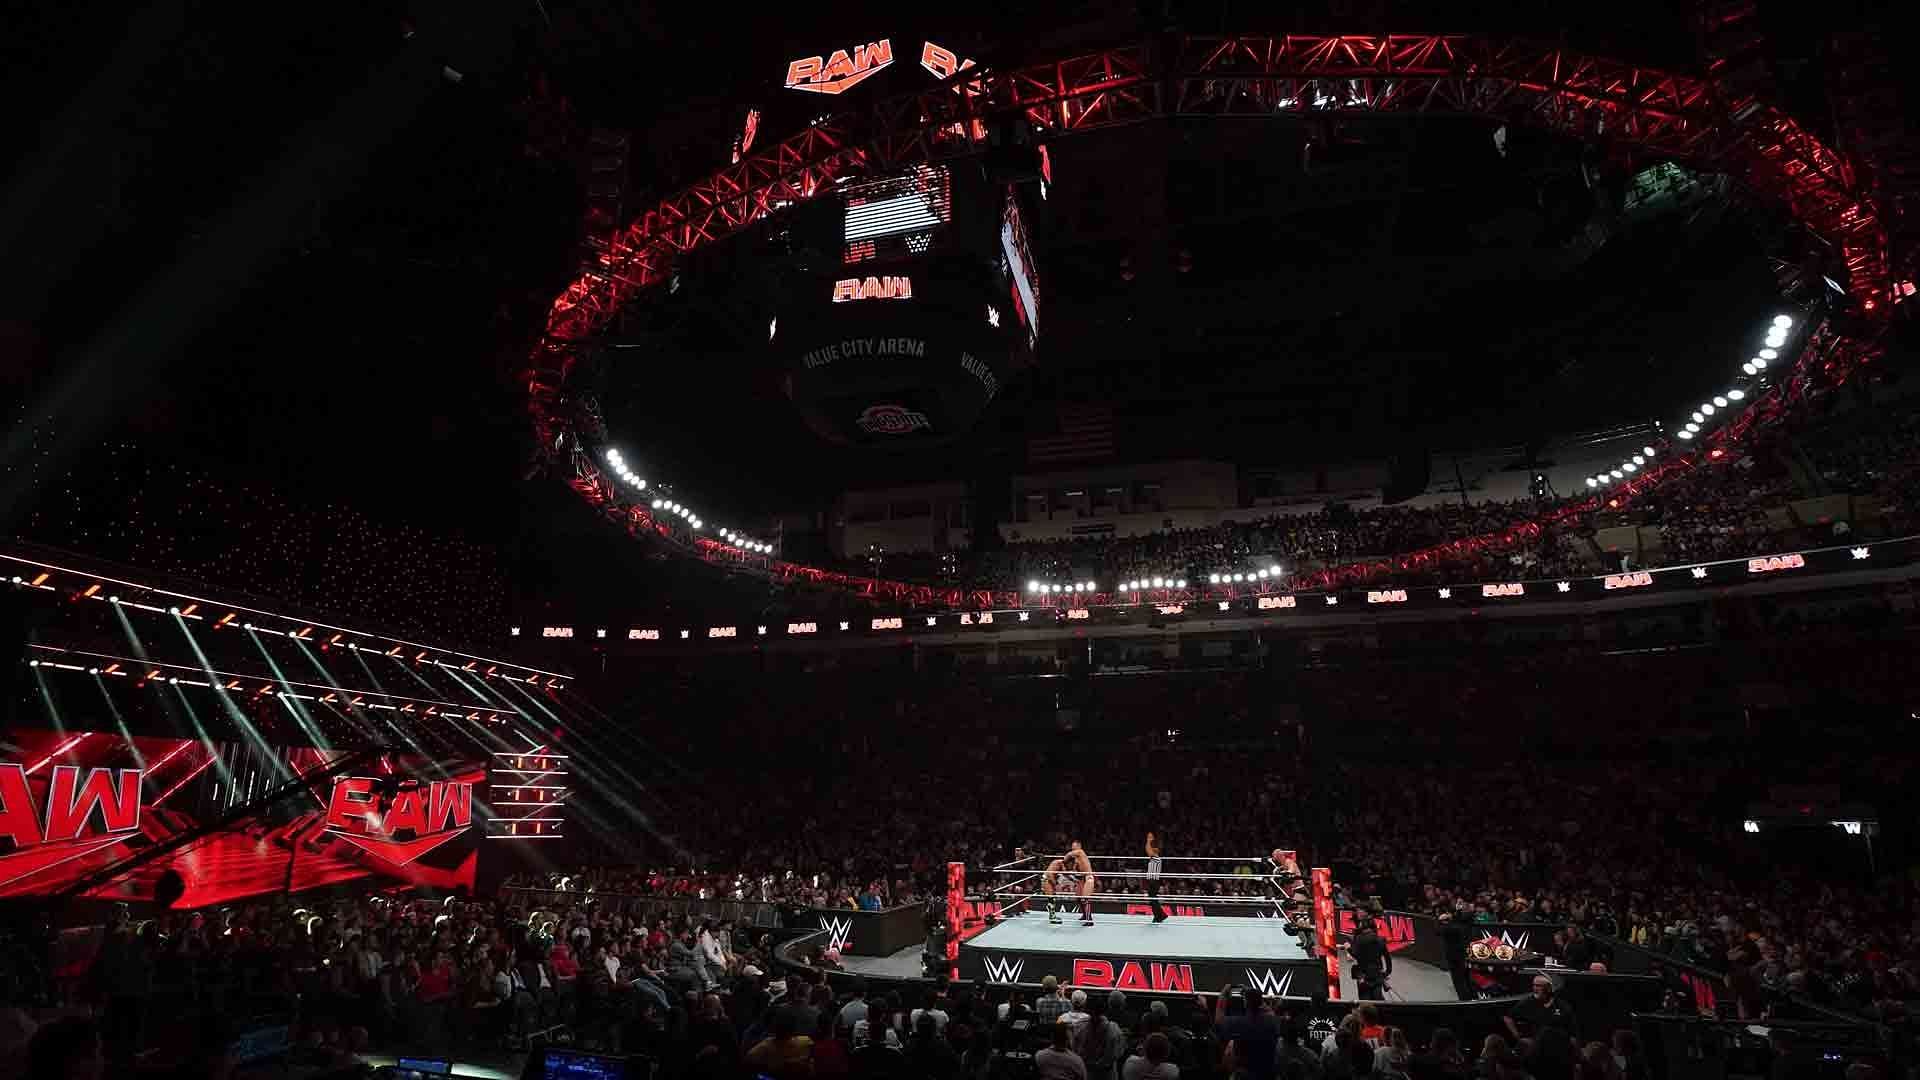 The WWE Universe packs local arena for a live RAW episode